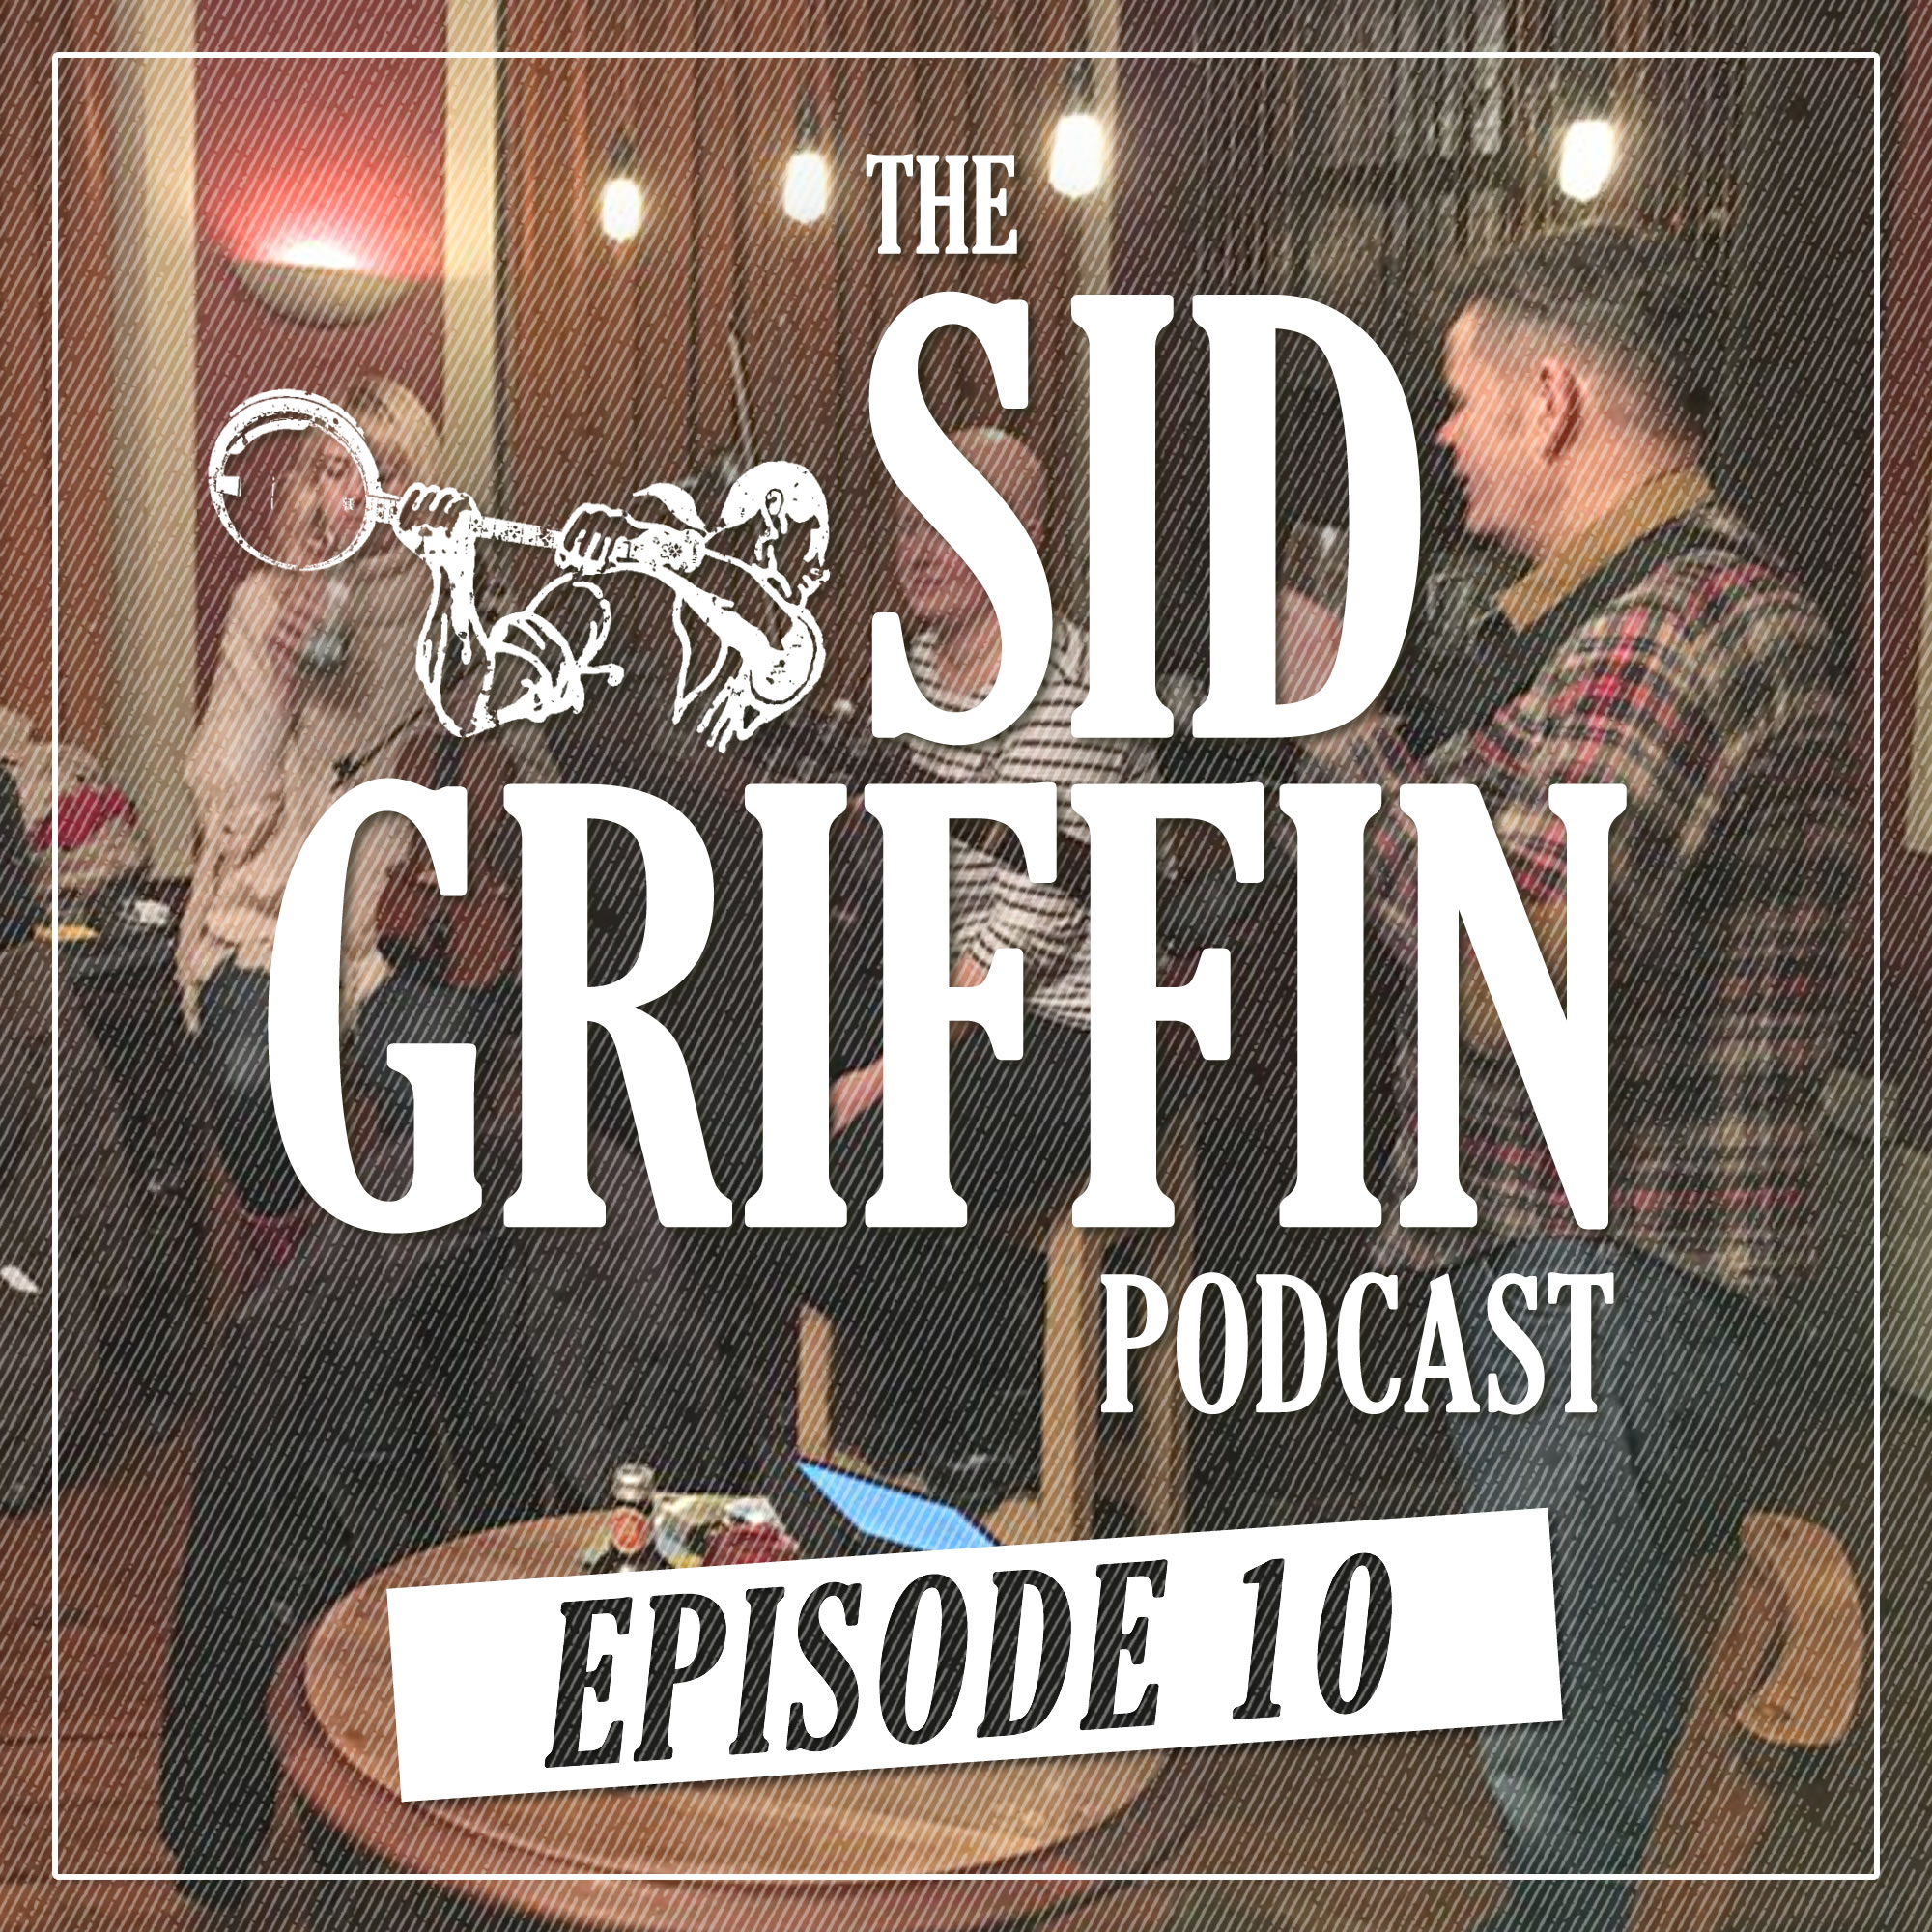 Call All Coal Porters, The Sid Griffin Podcast - No.10